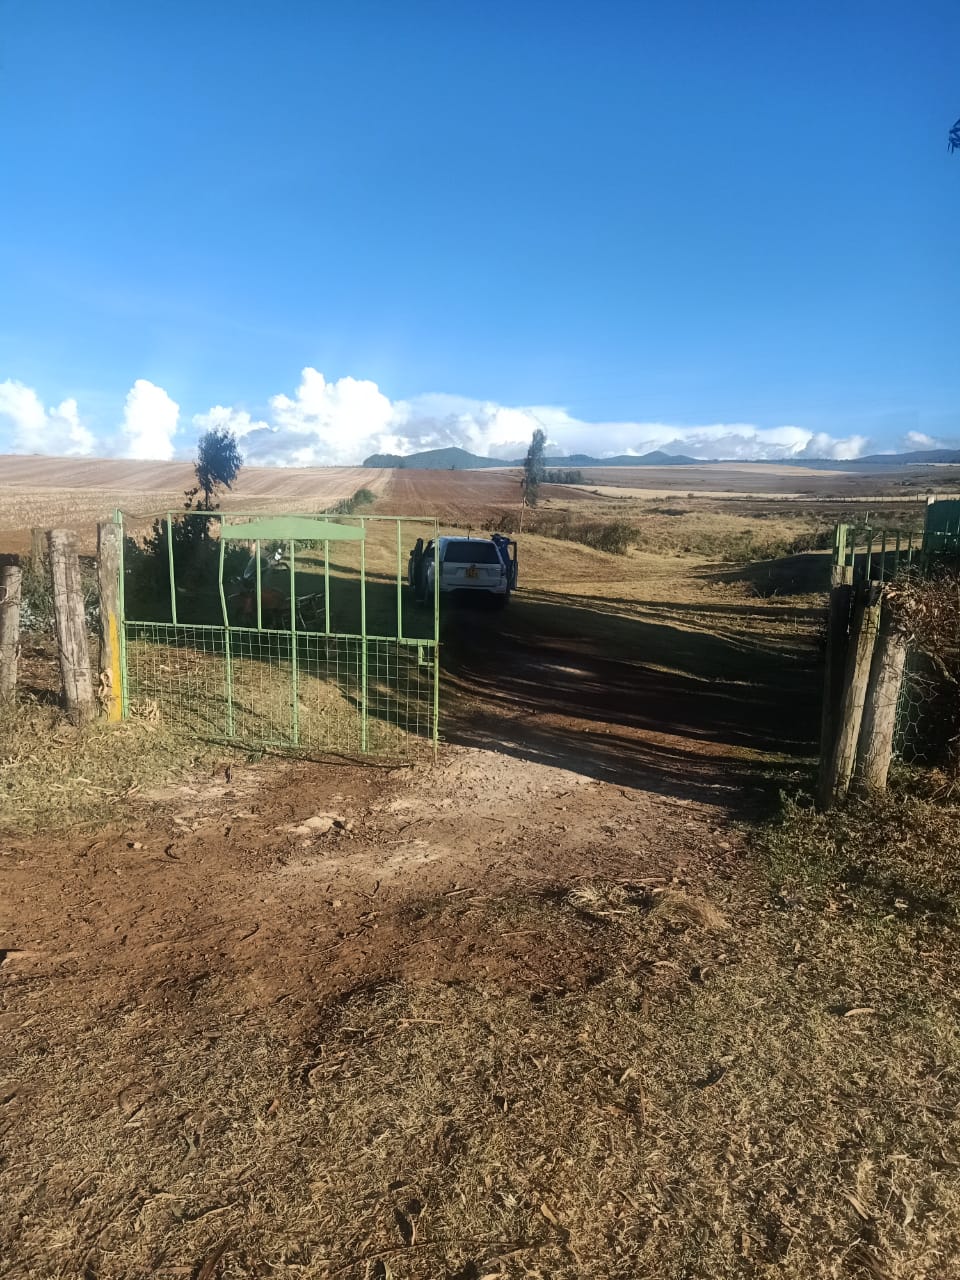 14.5 Acres agricultural land for sale in Timau Kisima Touching tarmac